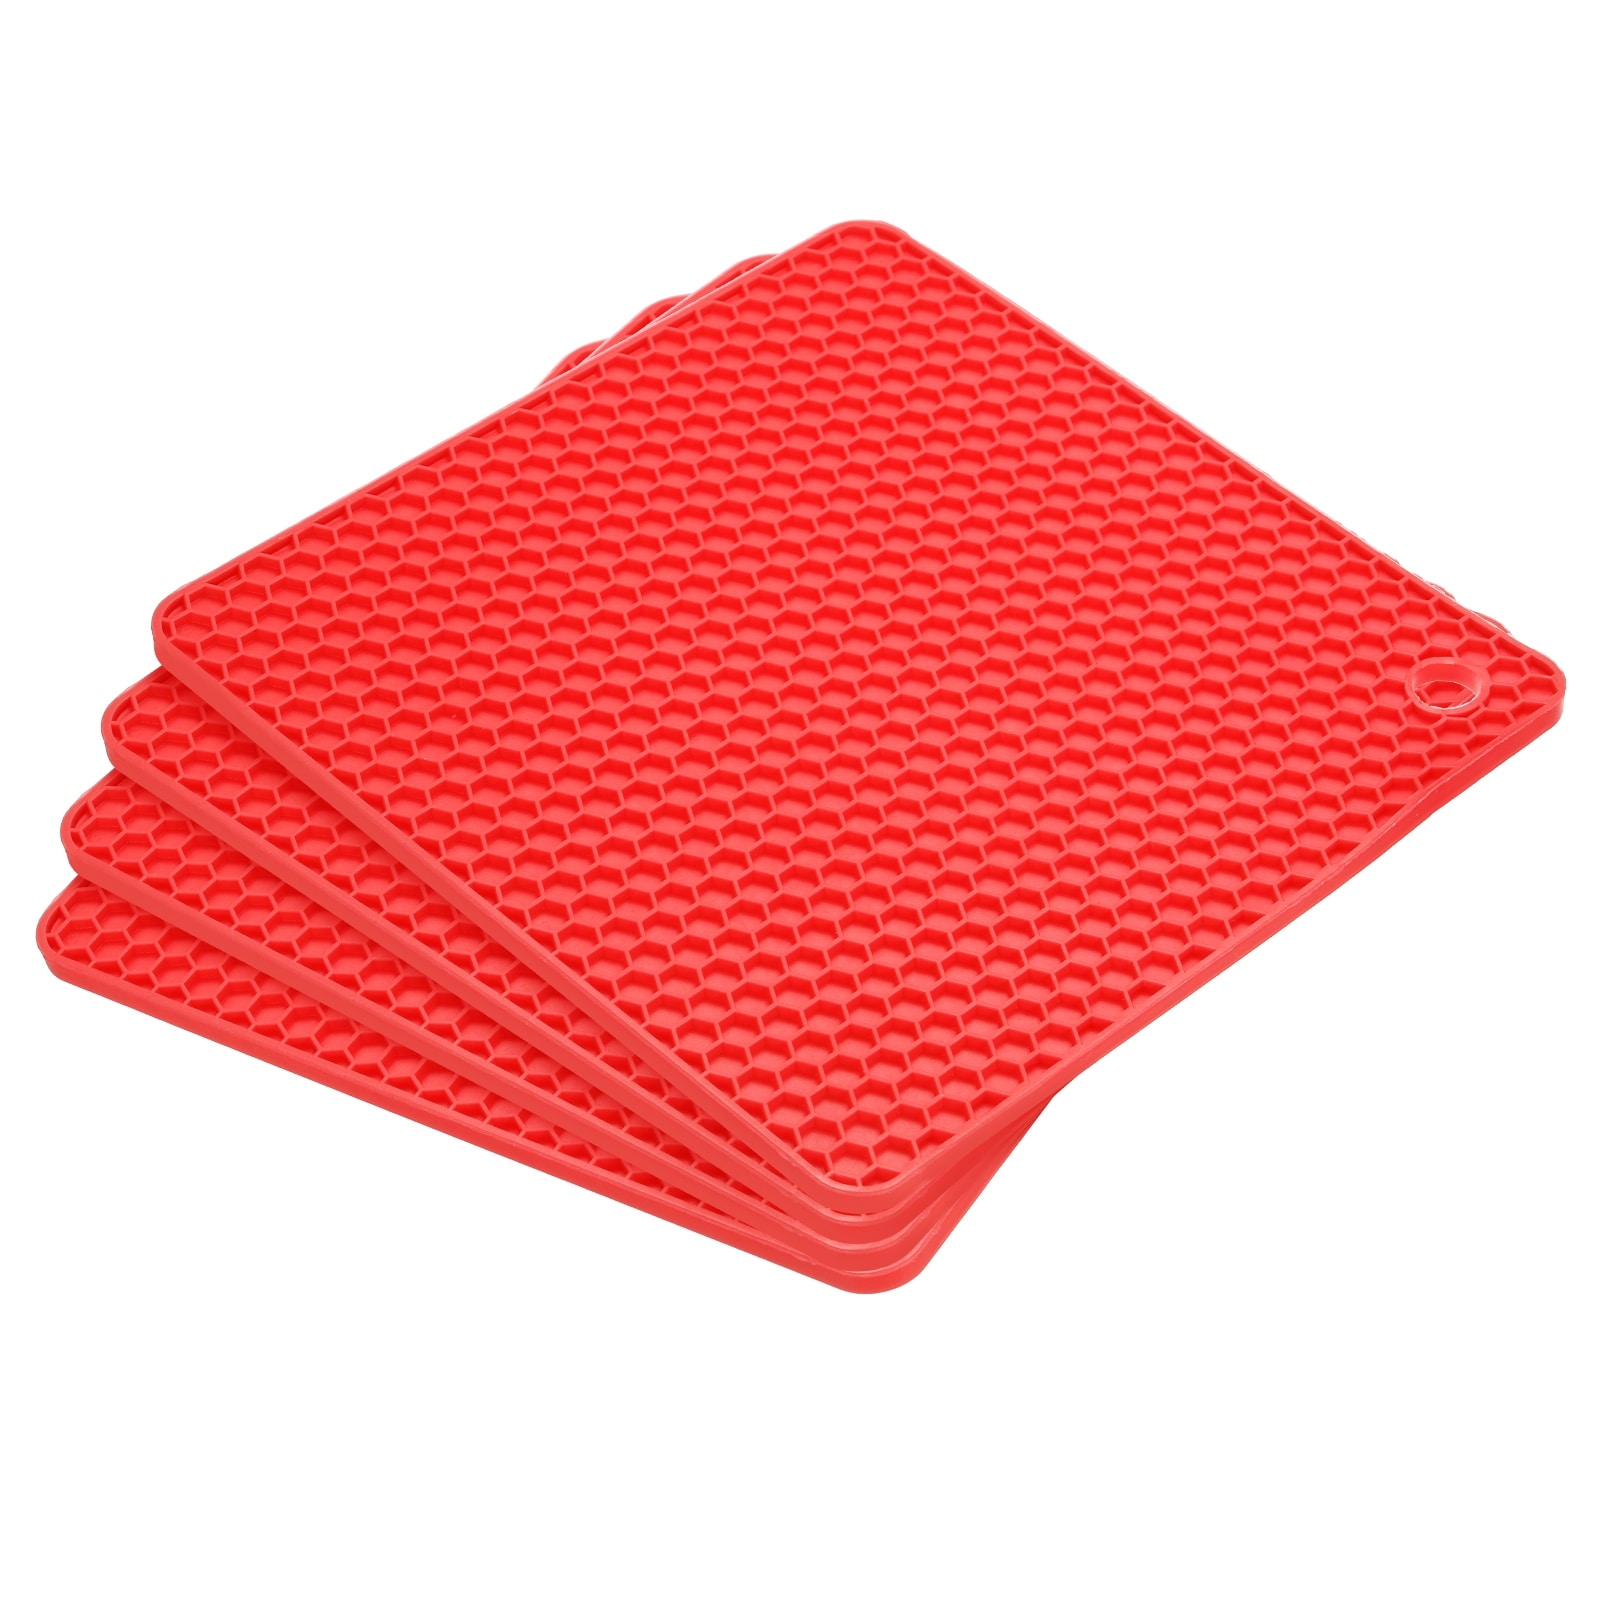 Silicone Pot Holders - Silicone Trivets For Hot Pots And Pans Silicone Hot  Pads, Hot Pot Pads, Place Mats,jar Openers ,oven Mitts 4 Colors